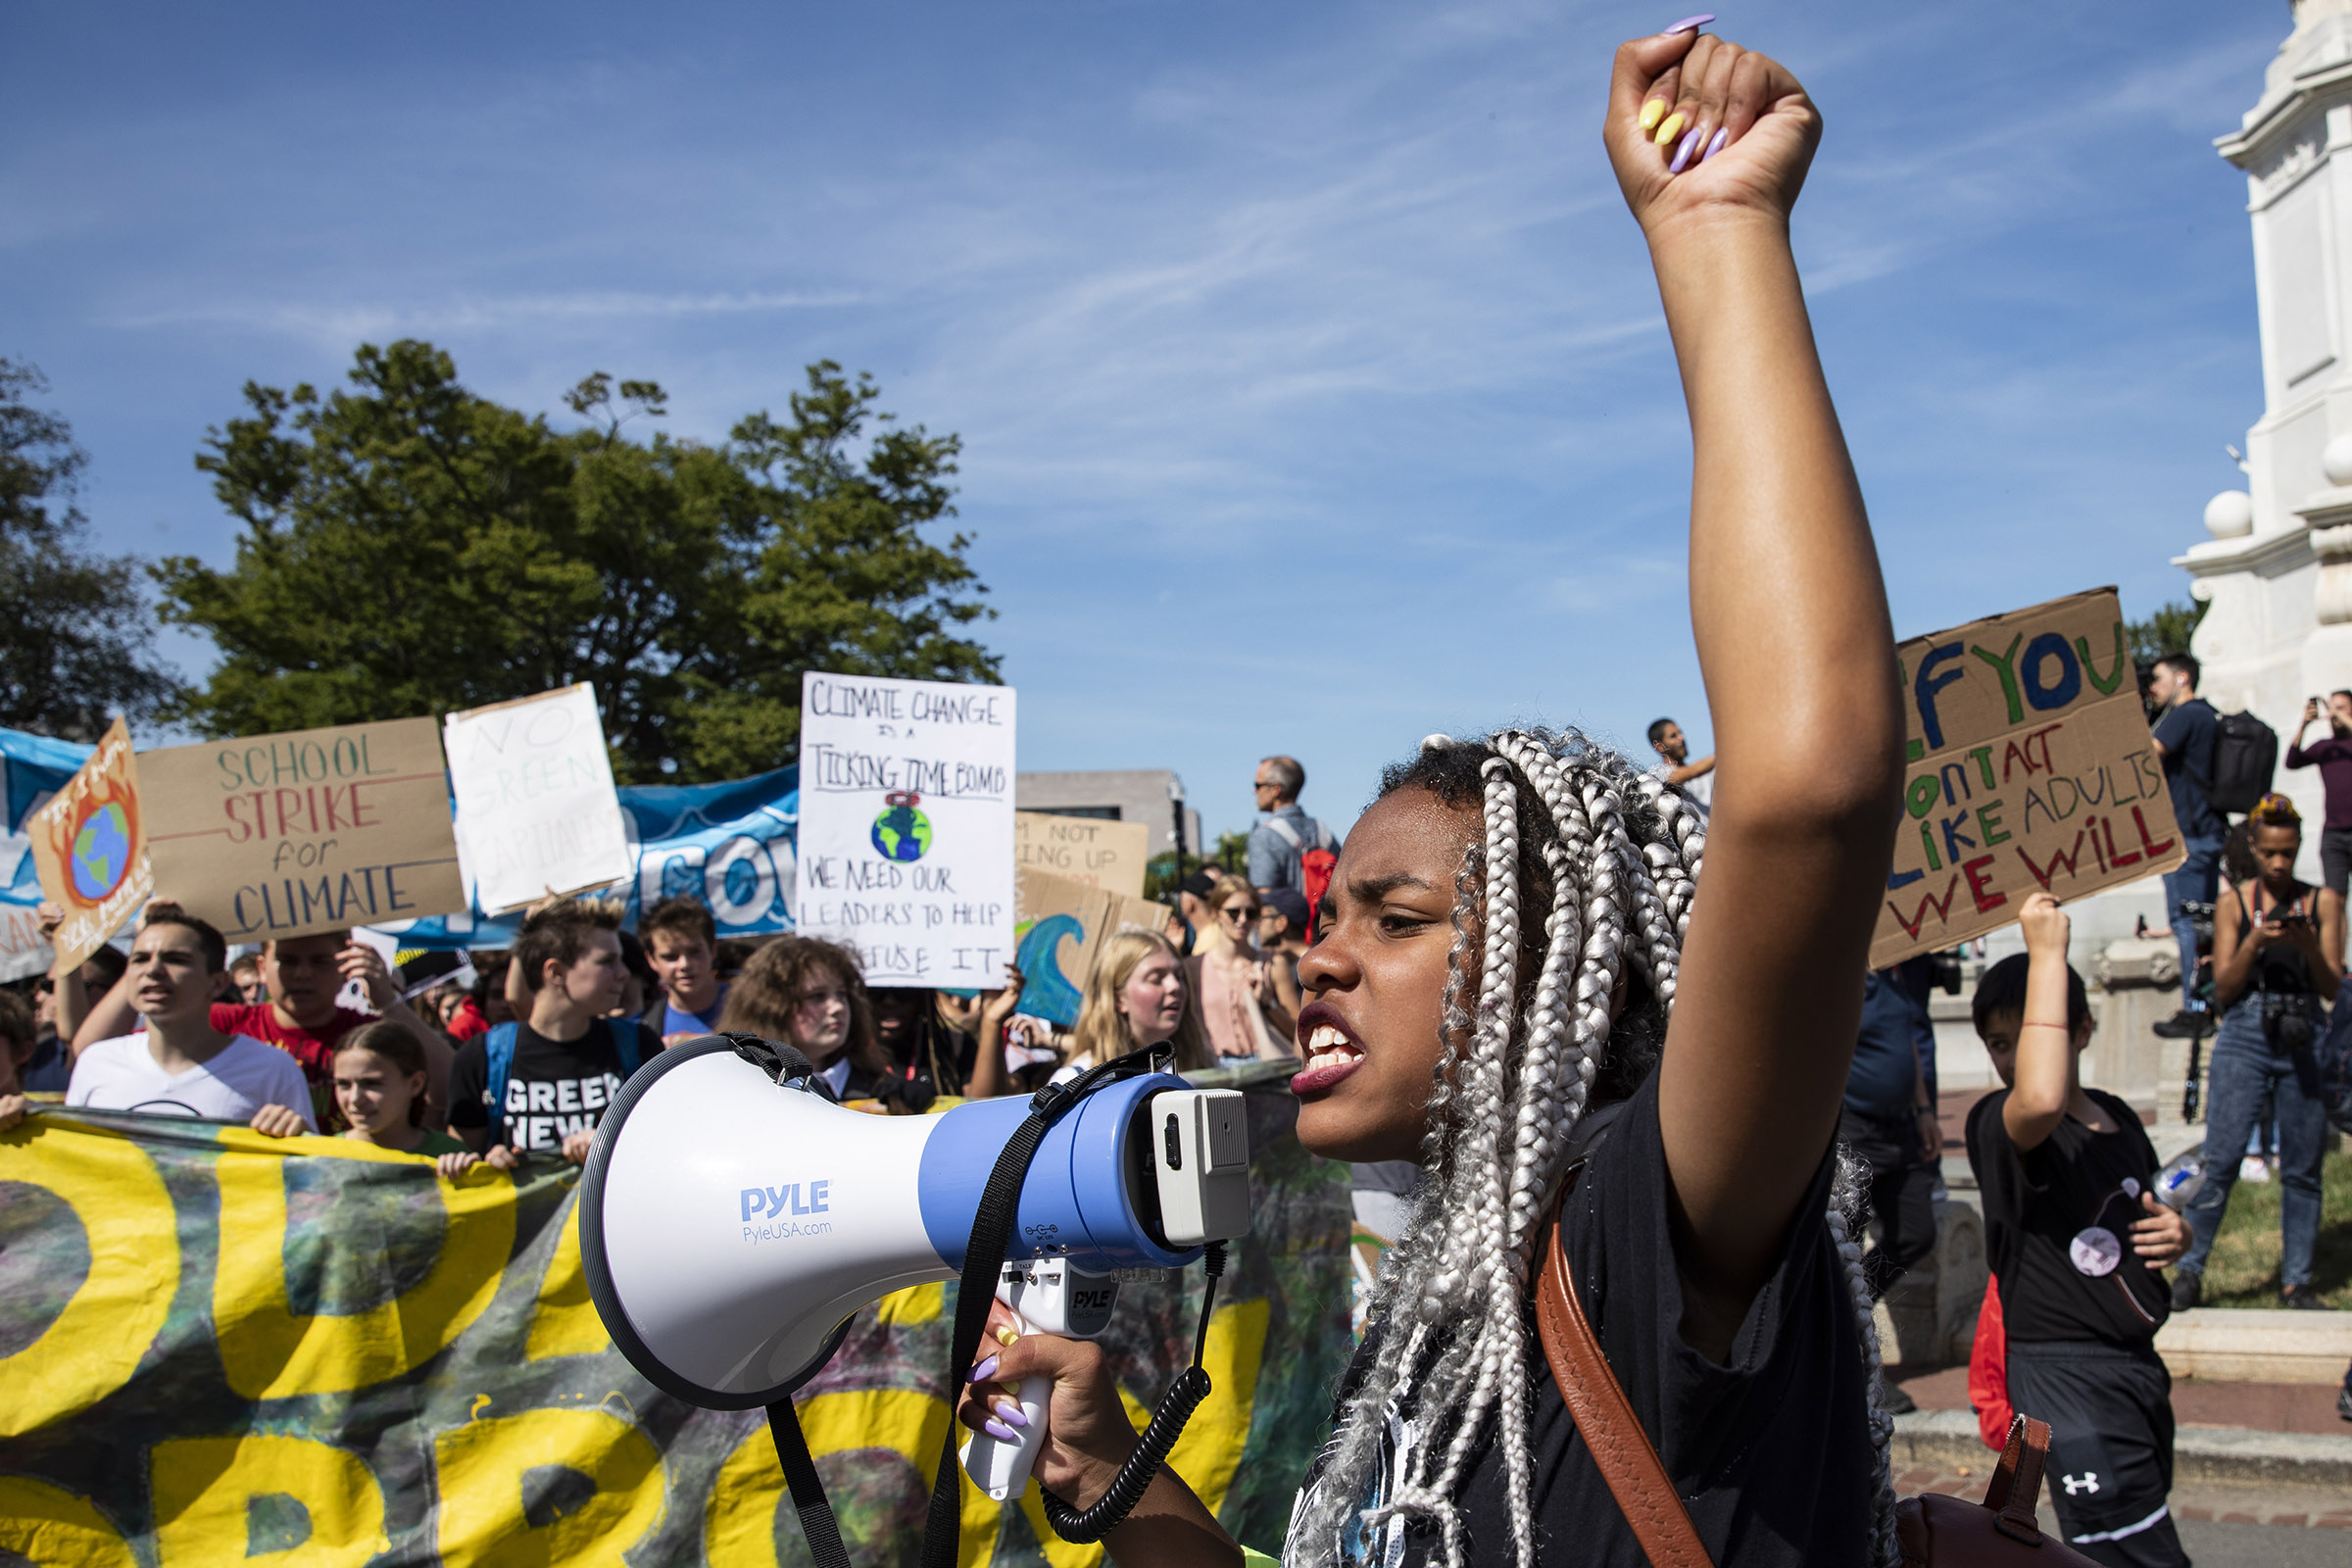 A'niya Taylor, 16, from Baltimore, MD, leads other youth down Pennsylvania Avenue to the U.S. Capitol Building as part of the Global Climate Strike protests on September 20, 2019 in Washington, DC. (Samuel Corum—Getty Images)